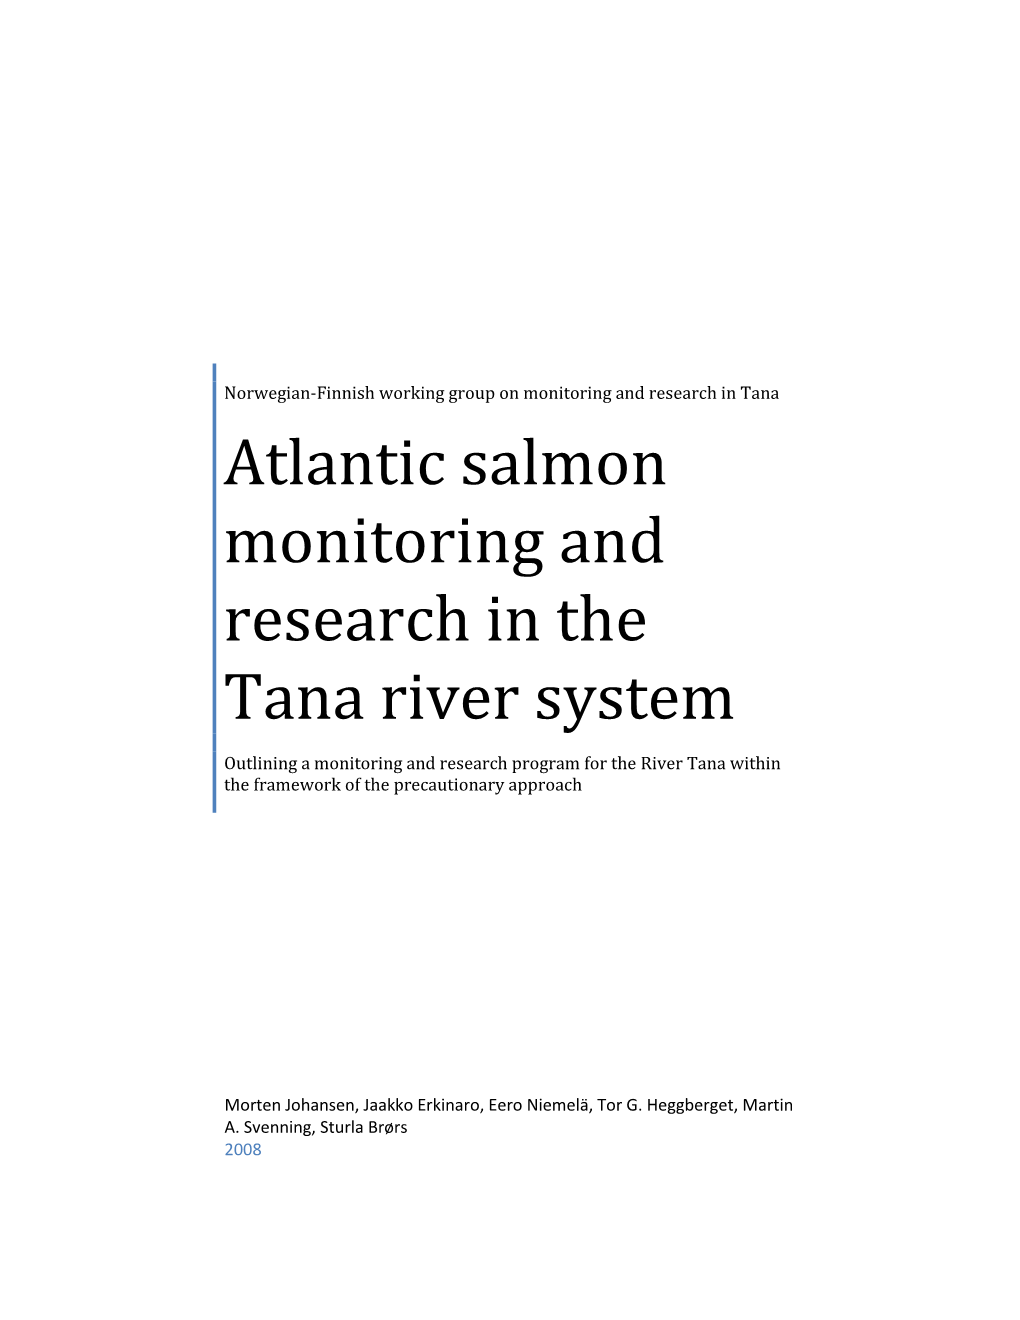 Atlantic Salmon Monitoring and Research in the Tana River System